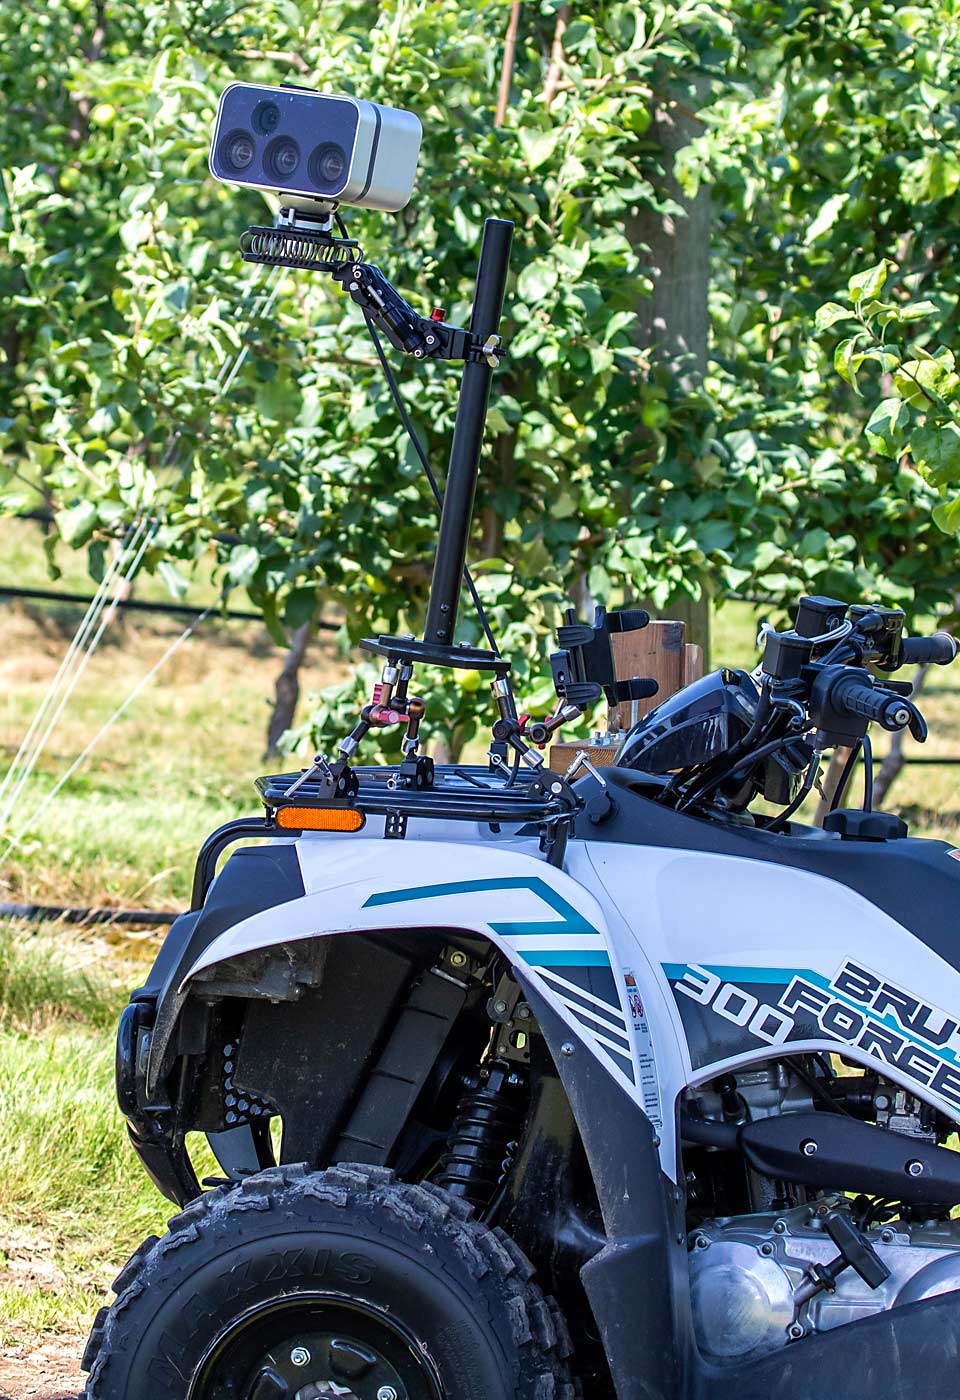 Vivid Machines' Vivid-X vision system, on display at Crisp Growers in Nova Scotia, connects to ATVs and other vehicles and helps growers with precise crop load management.  (TJ Mullinax/Good Fruit Grower)